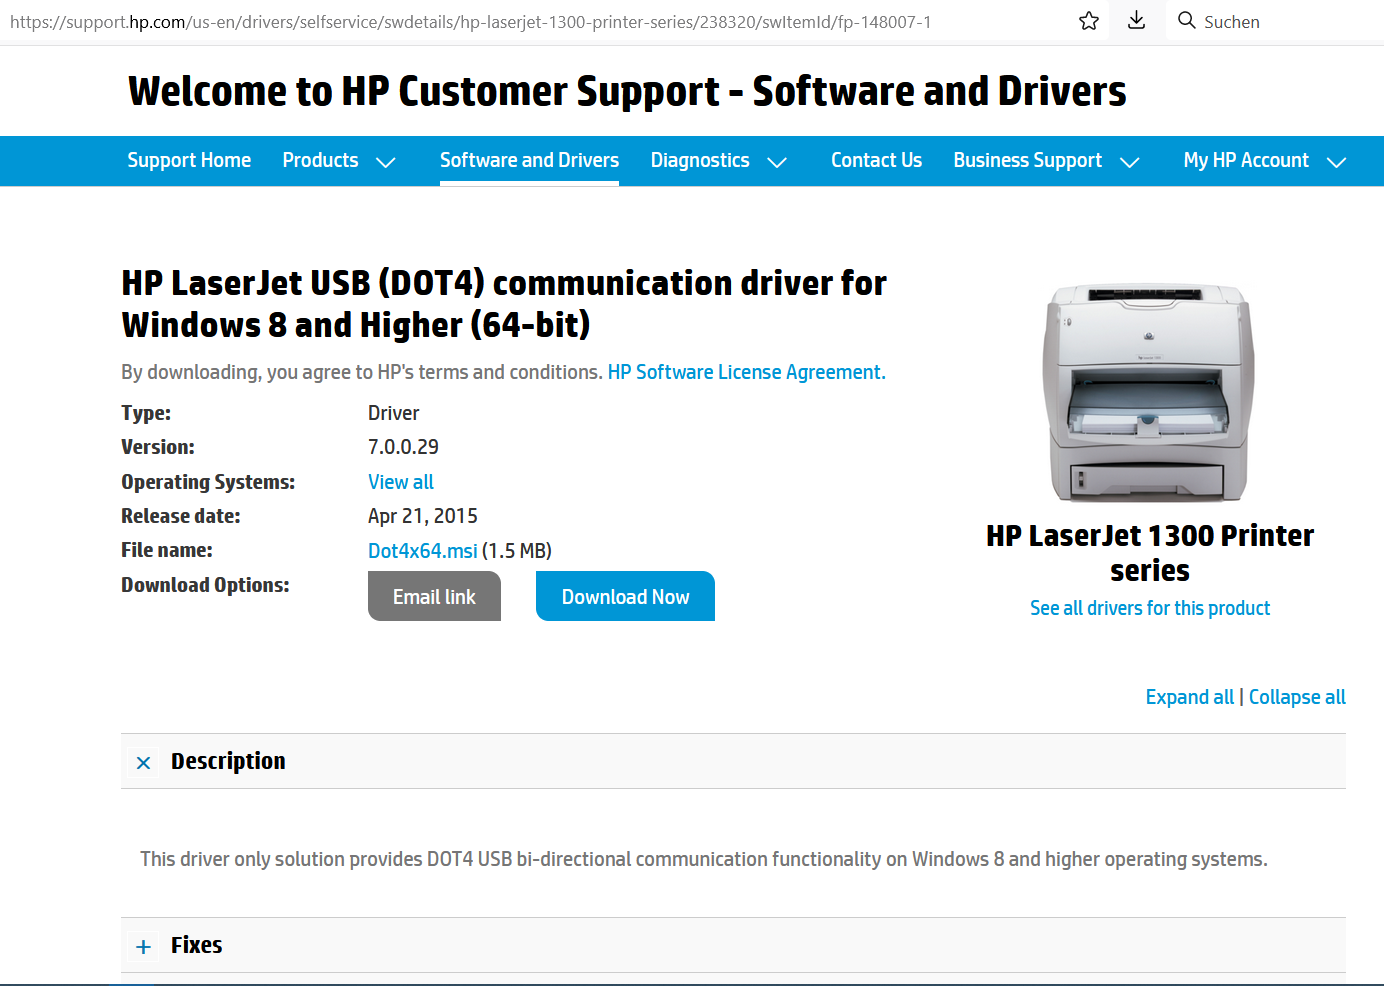 DRIVER FOR PINTER HP 1300 - HP Community 8493282